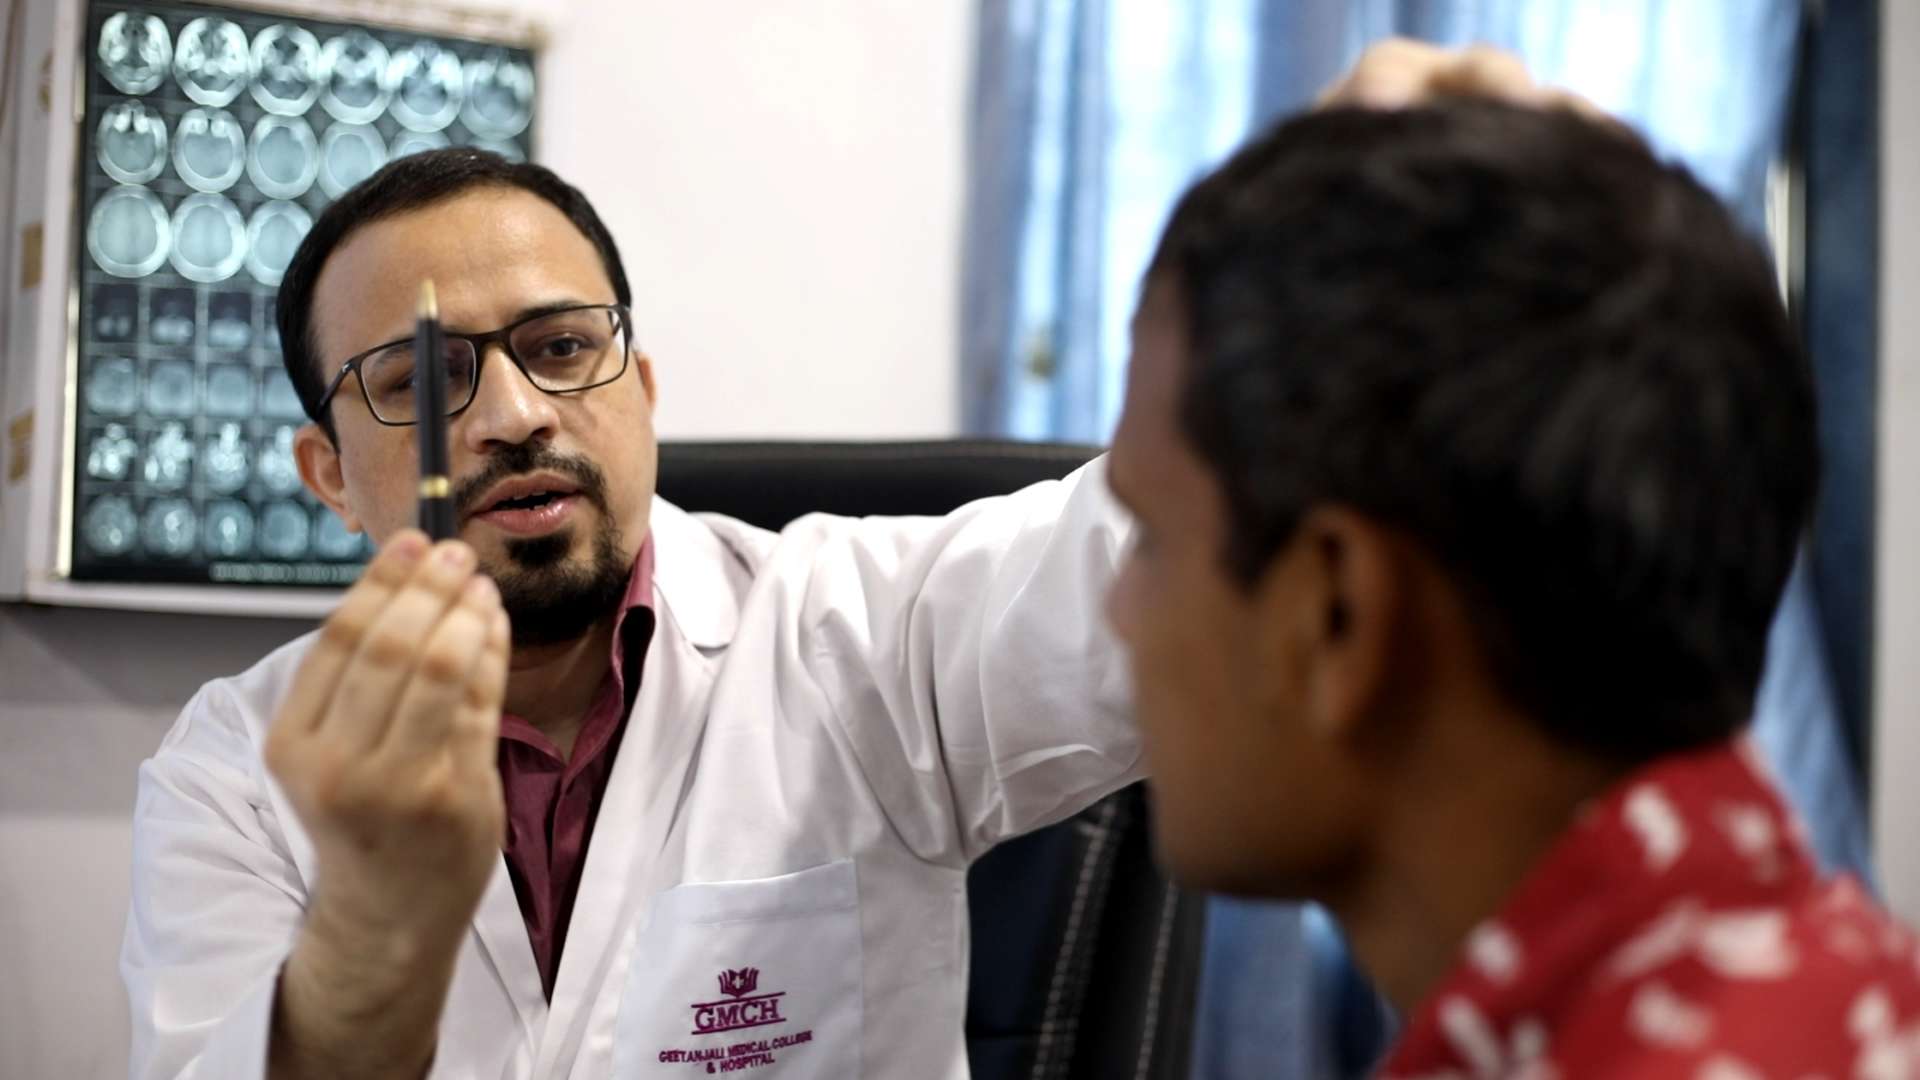 Learn more about Epilepsy from Dr Anis Jukkerwala - Pioneer Epileptologist in South Rajasthan